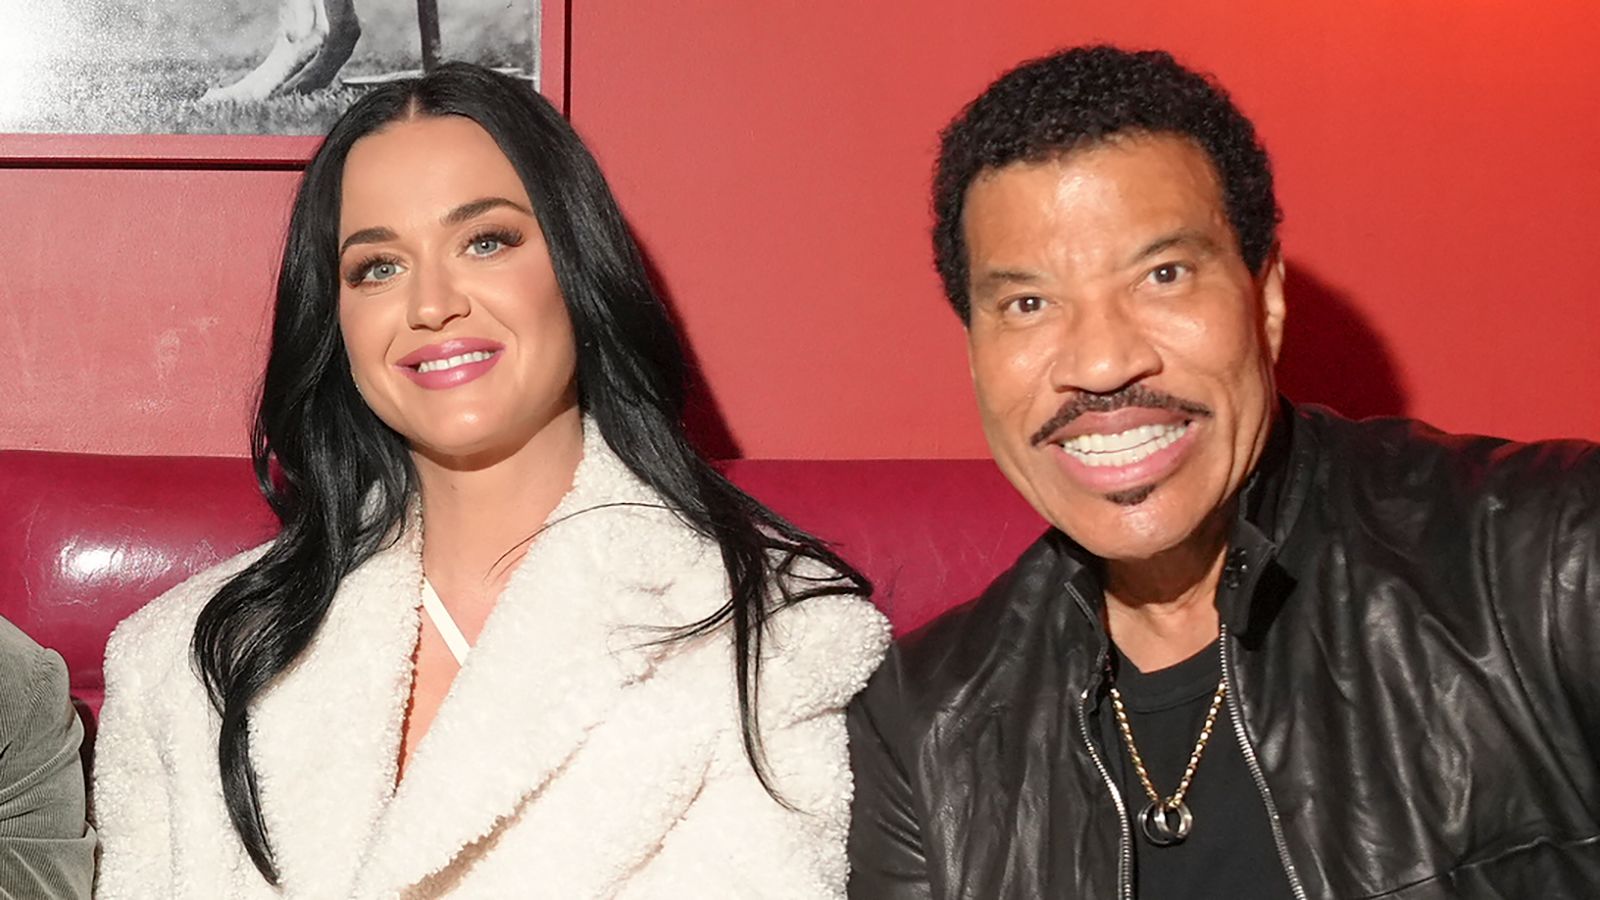 Lionel Richie, Katy Perry Close King Charles III Coronation With Star-Studded Lineup